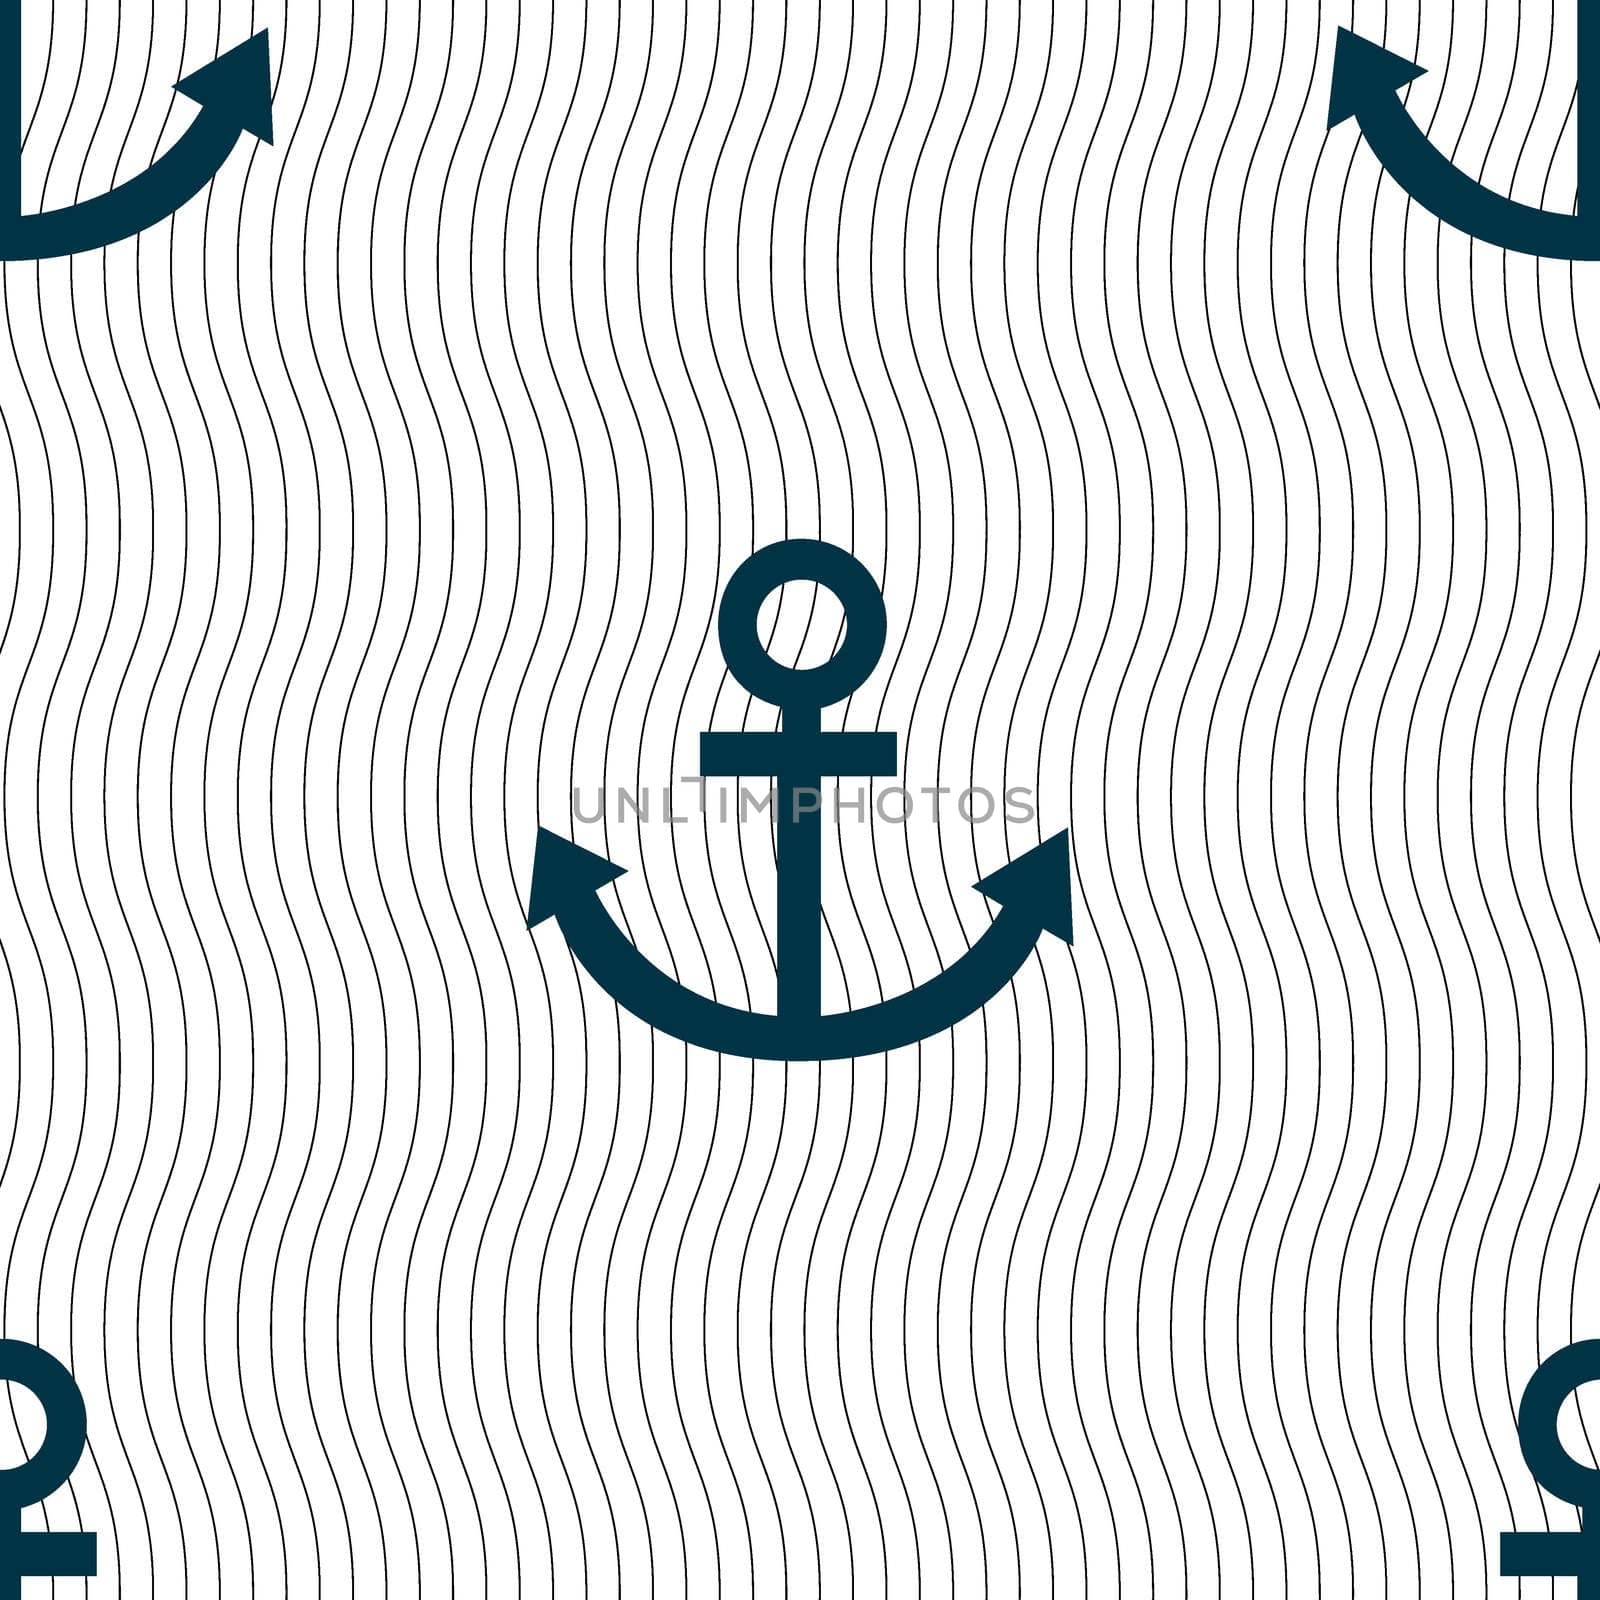 Anchor icon. Seamless pattern with geometric texture. illustration